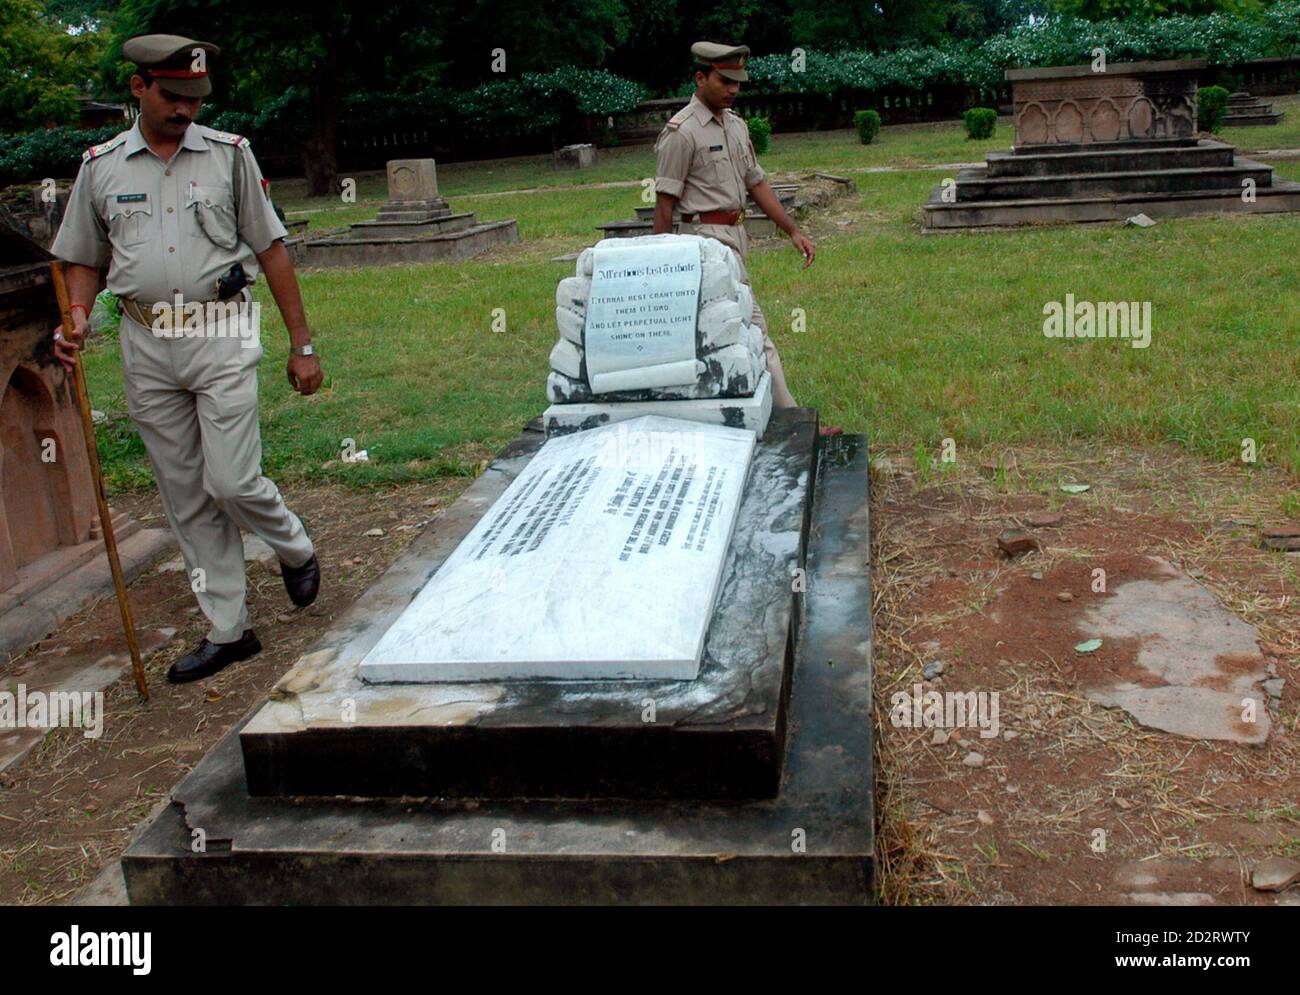 Police walk near a grave of a British soldier at the Residency in Lucknow September 24, 2007. A group of retired British soldiers and civilians visiting India have caused outrage during their trip to pay homage at sites where British soldiers died during the 1857 revolt against colonial rule.  REUTERS/Pawan Kumar (INDIA) Stock Photo